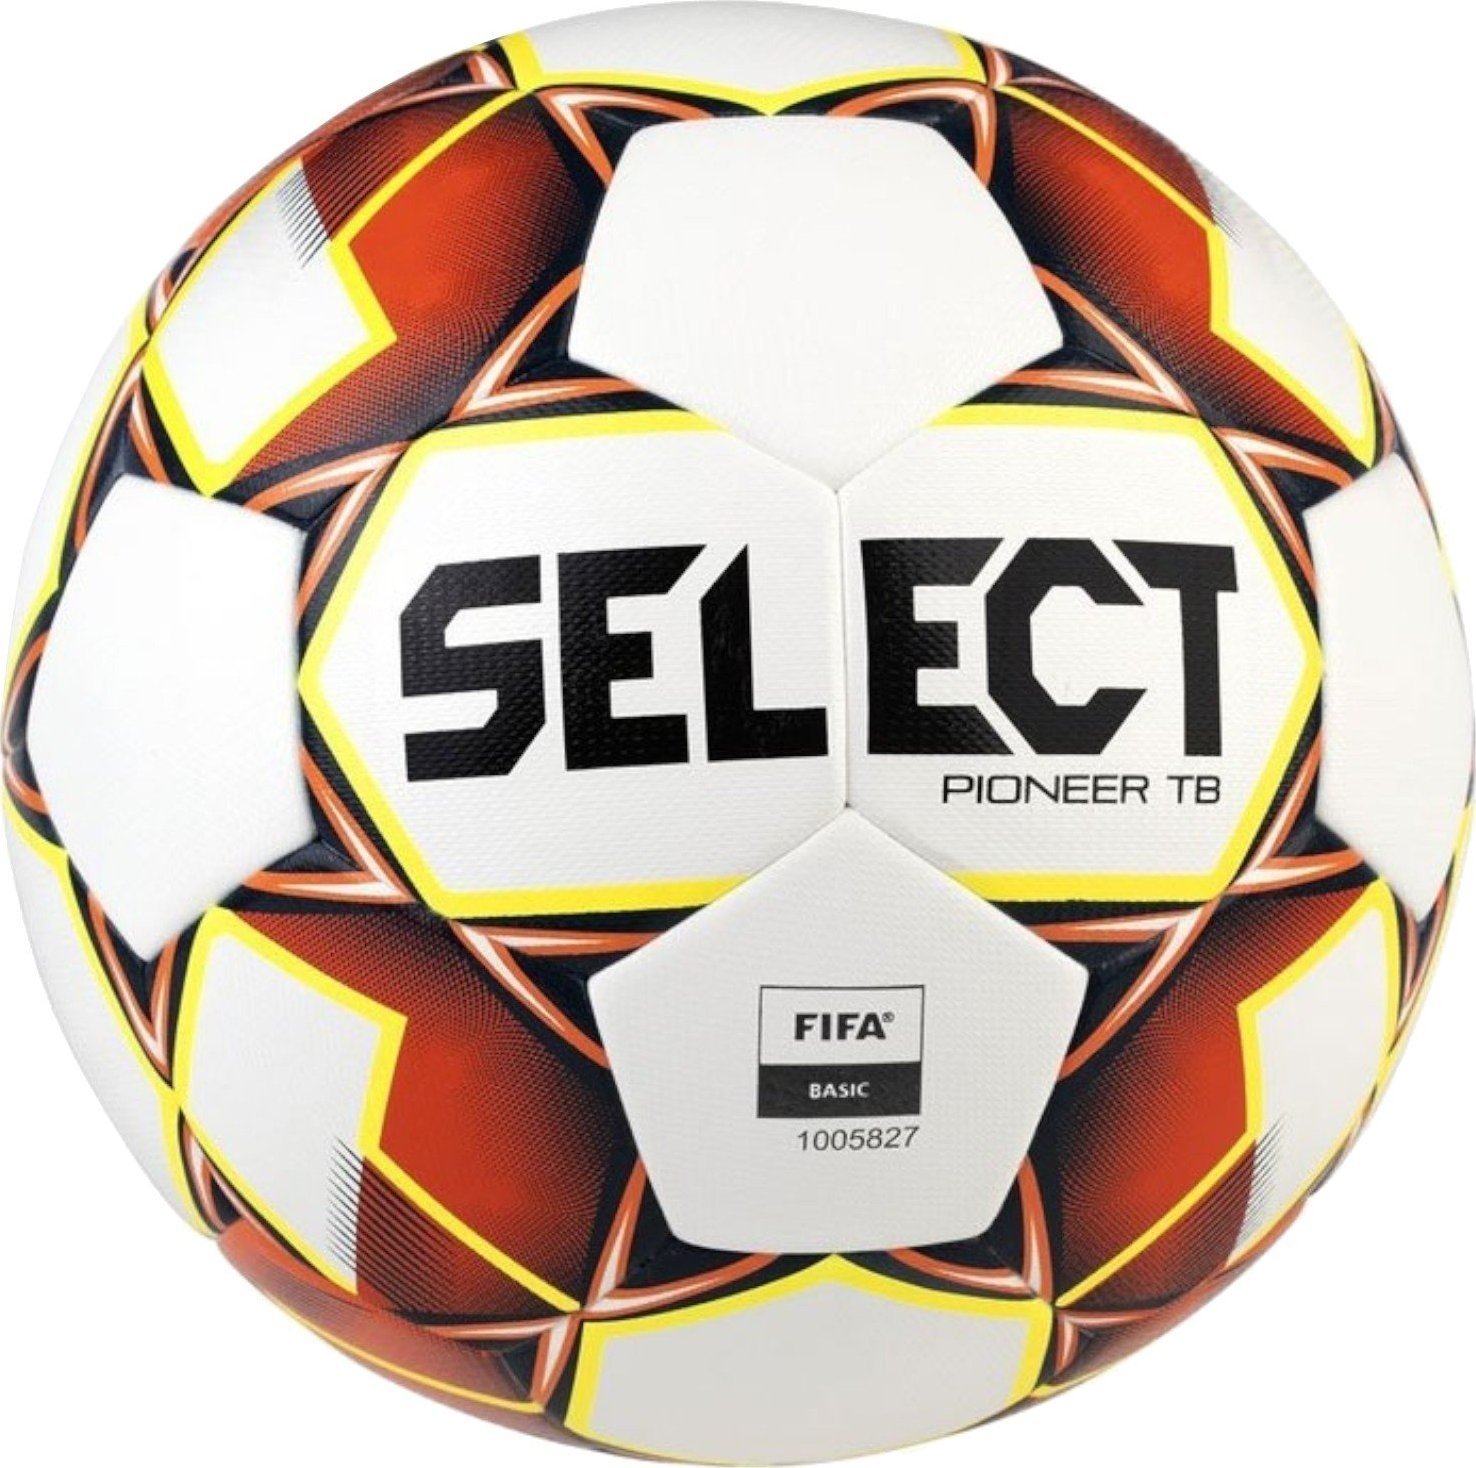 Select Select Pioneer TB FIFA Basic Ball PIONEER WHT-ORG biale 5 PIONEER WHT-ORG (5703543277605) bumba